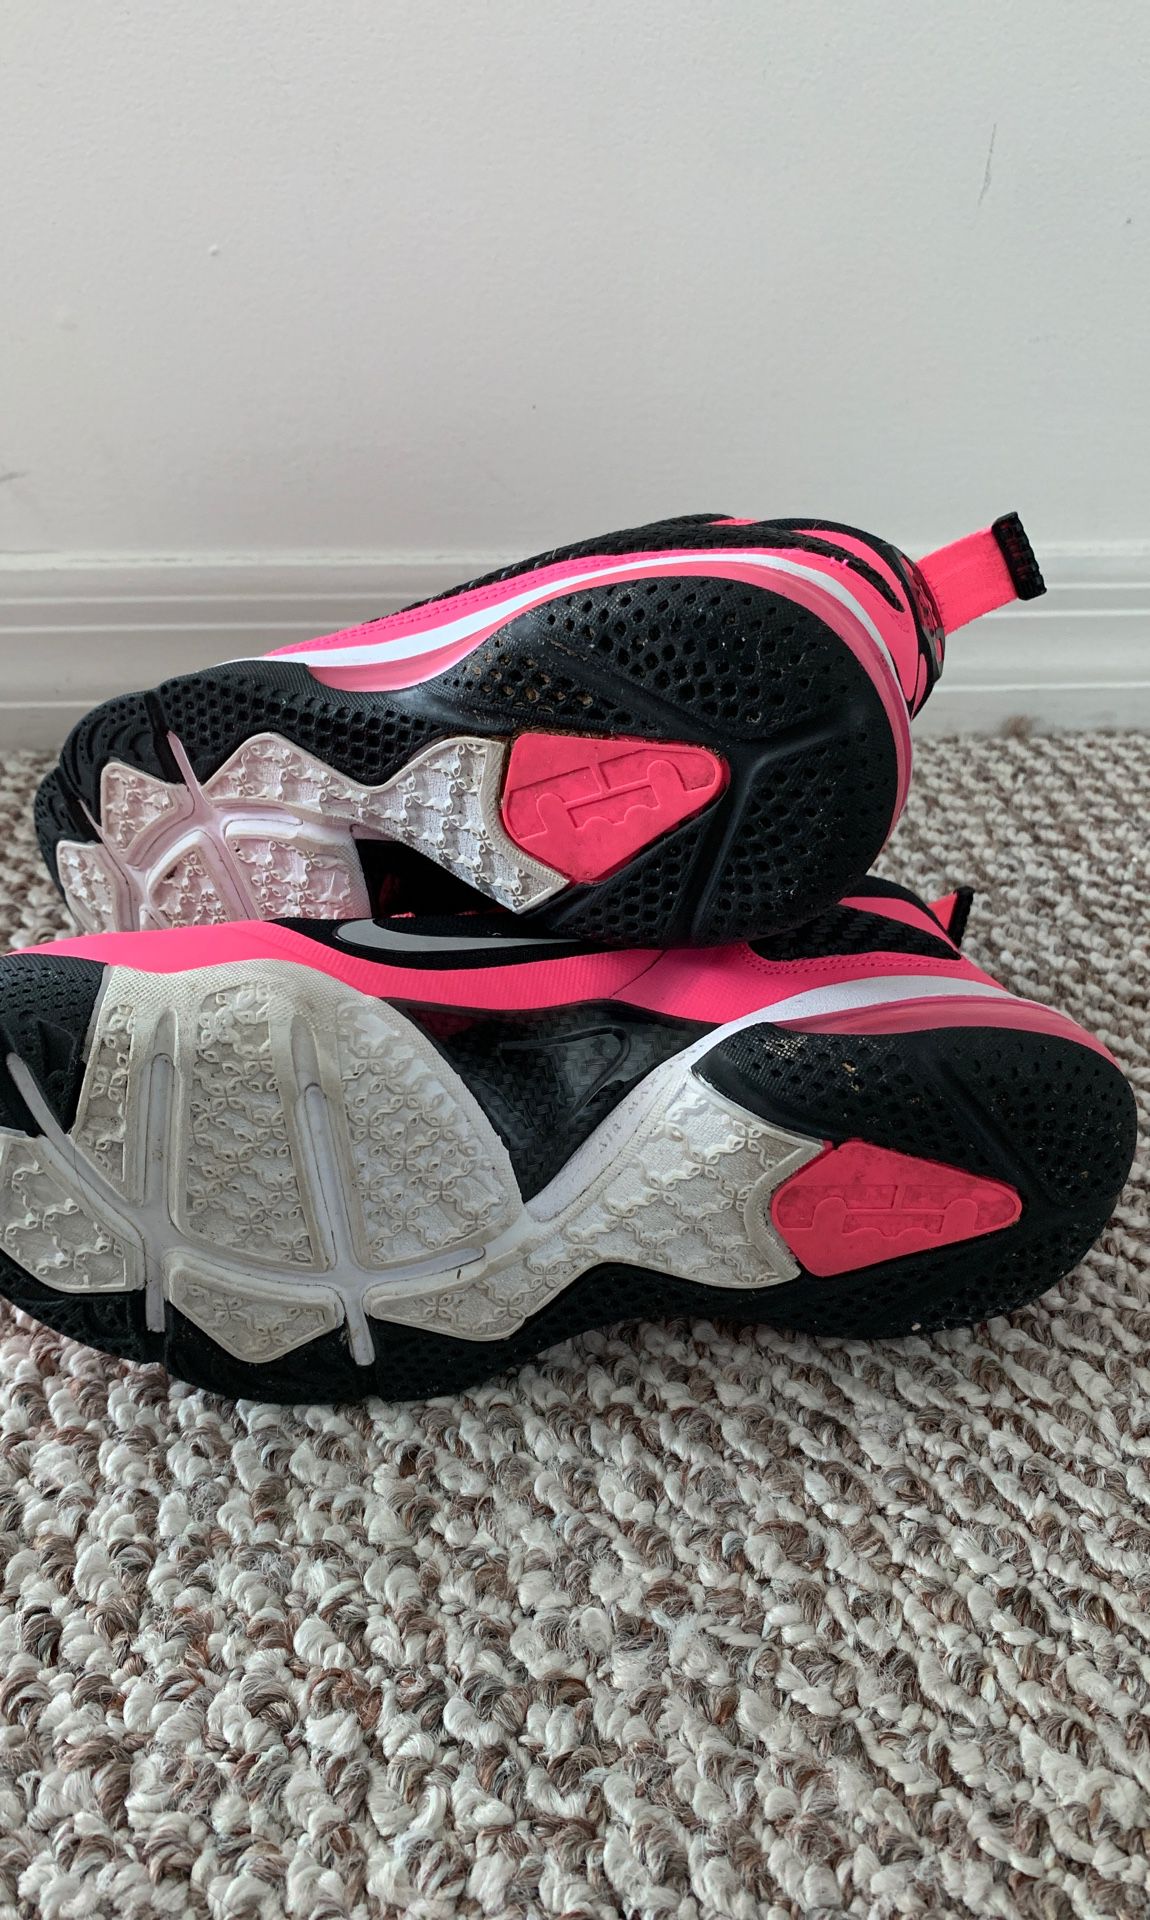 Pink Lebrons kids size 7 for Sale in Miami, FL - OfferUp